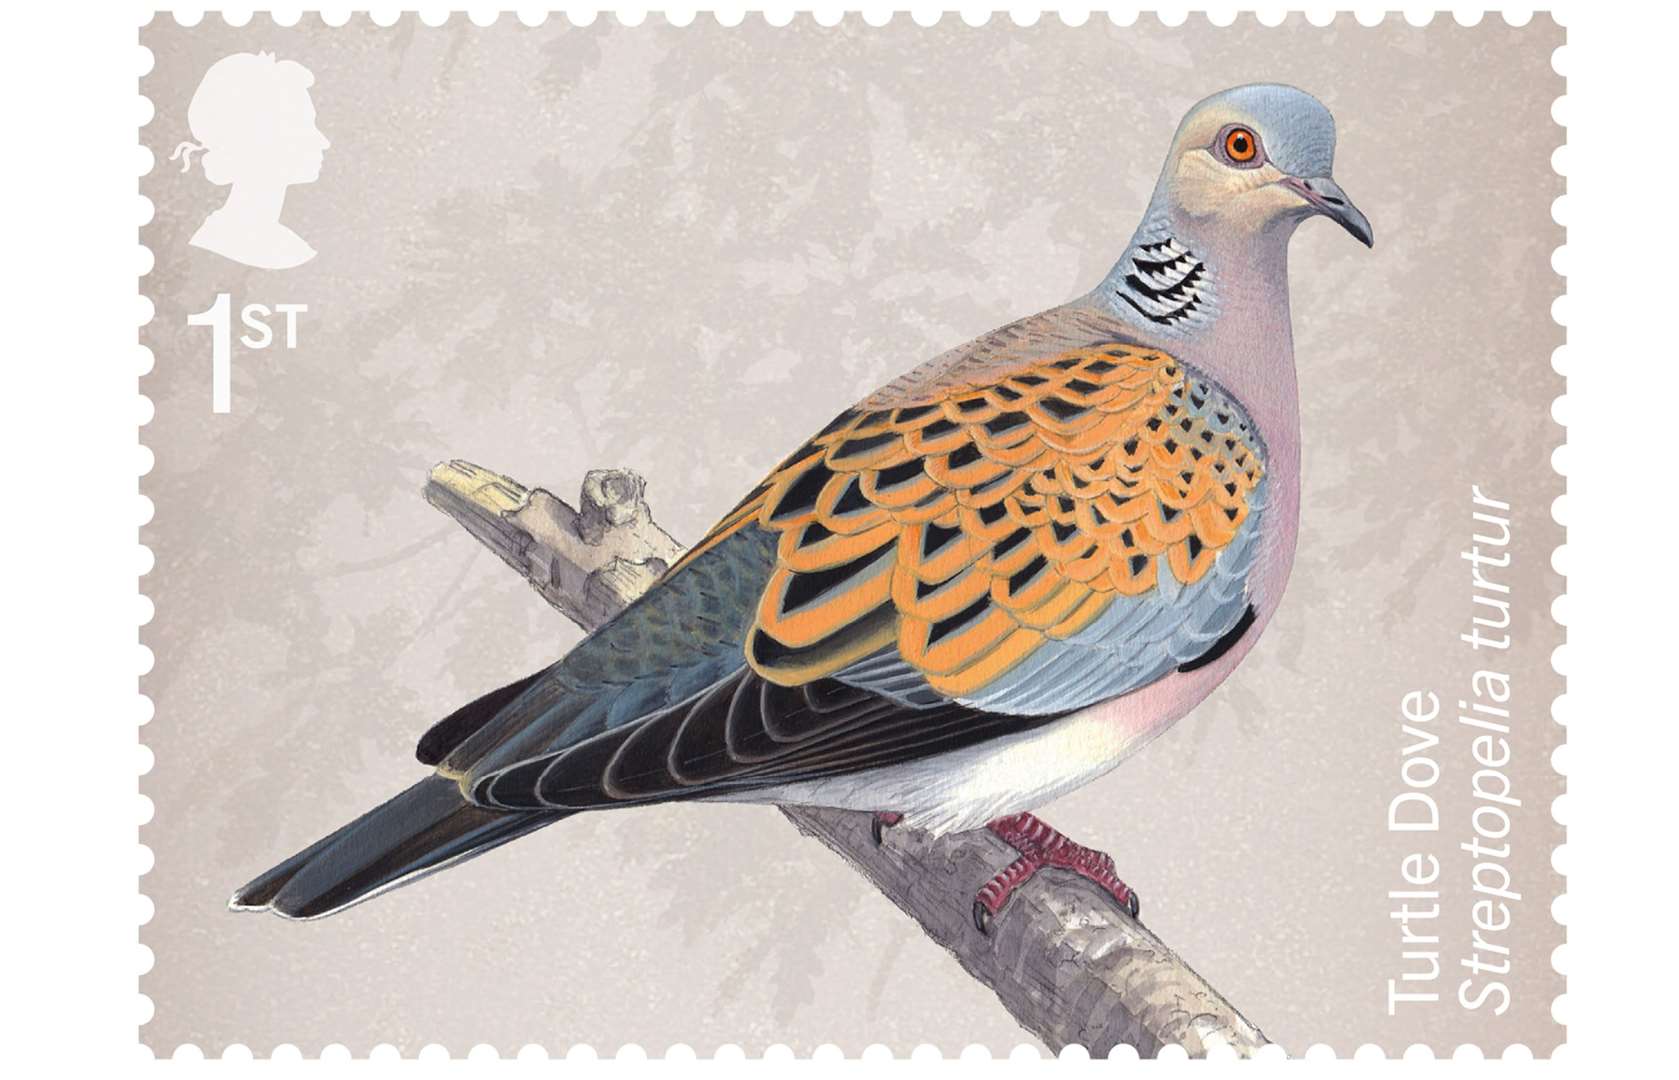 A turtle dove was chosen for one of the 10 stamps